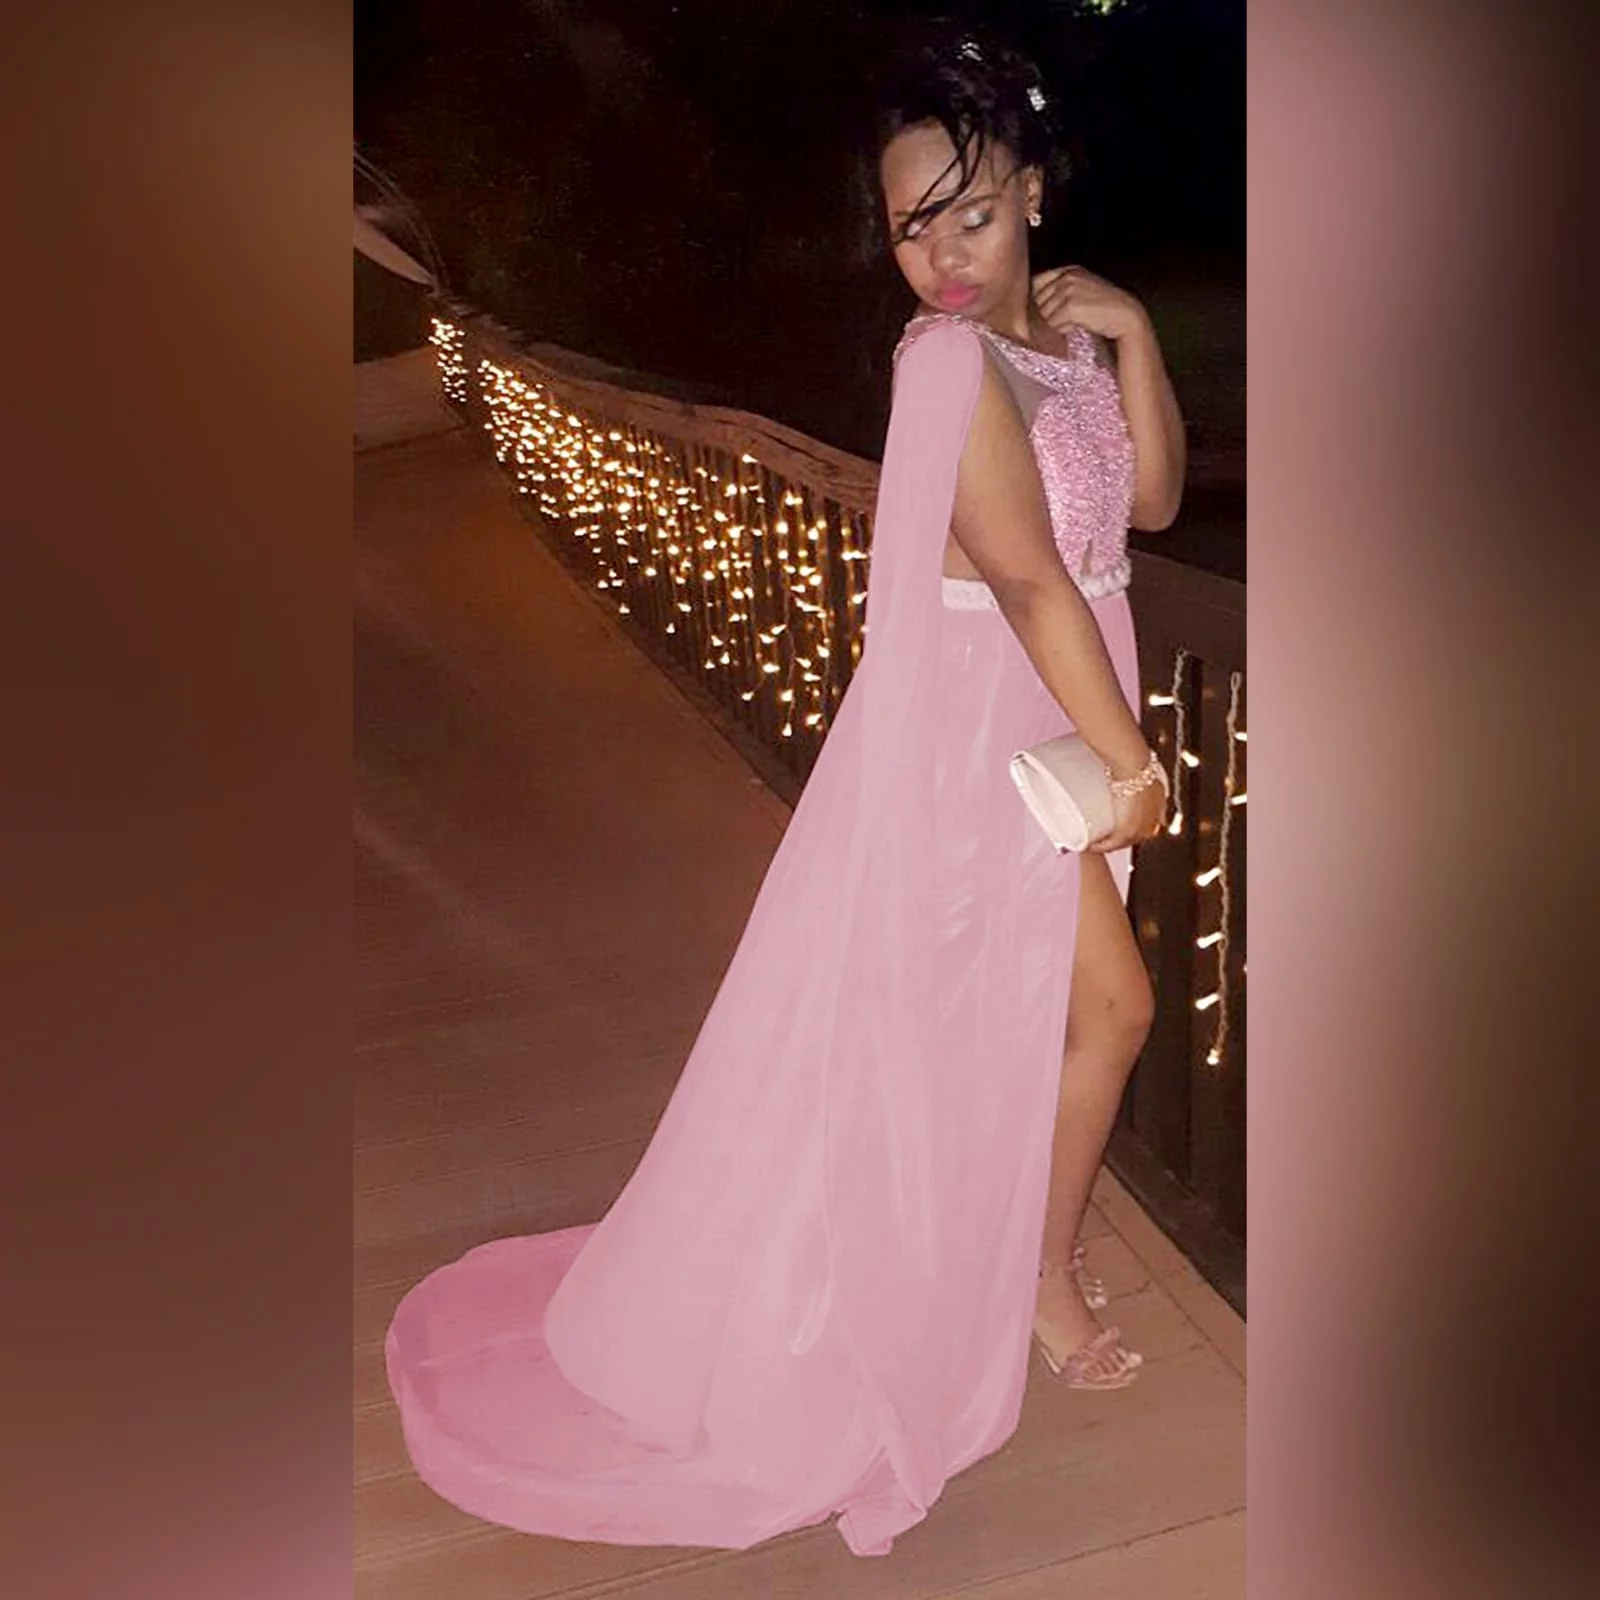 Dusty pink chiffon beaded prom dress 1 dusty pink chiffon beaded prom dress, bateau neckline effect with an illusion back, fully beaded bodice, plaited belt detail with a slit and a train. Shoulders with chiffon draping creating a goddess look.